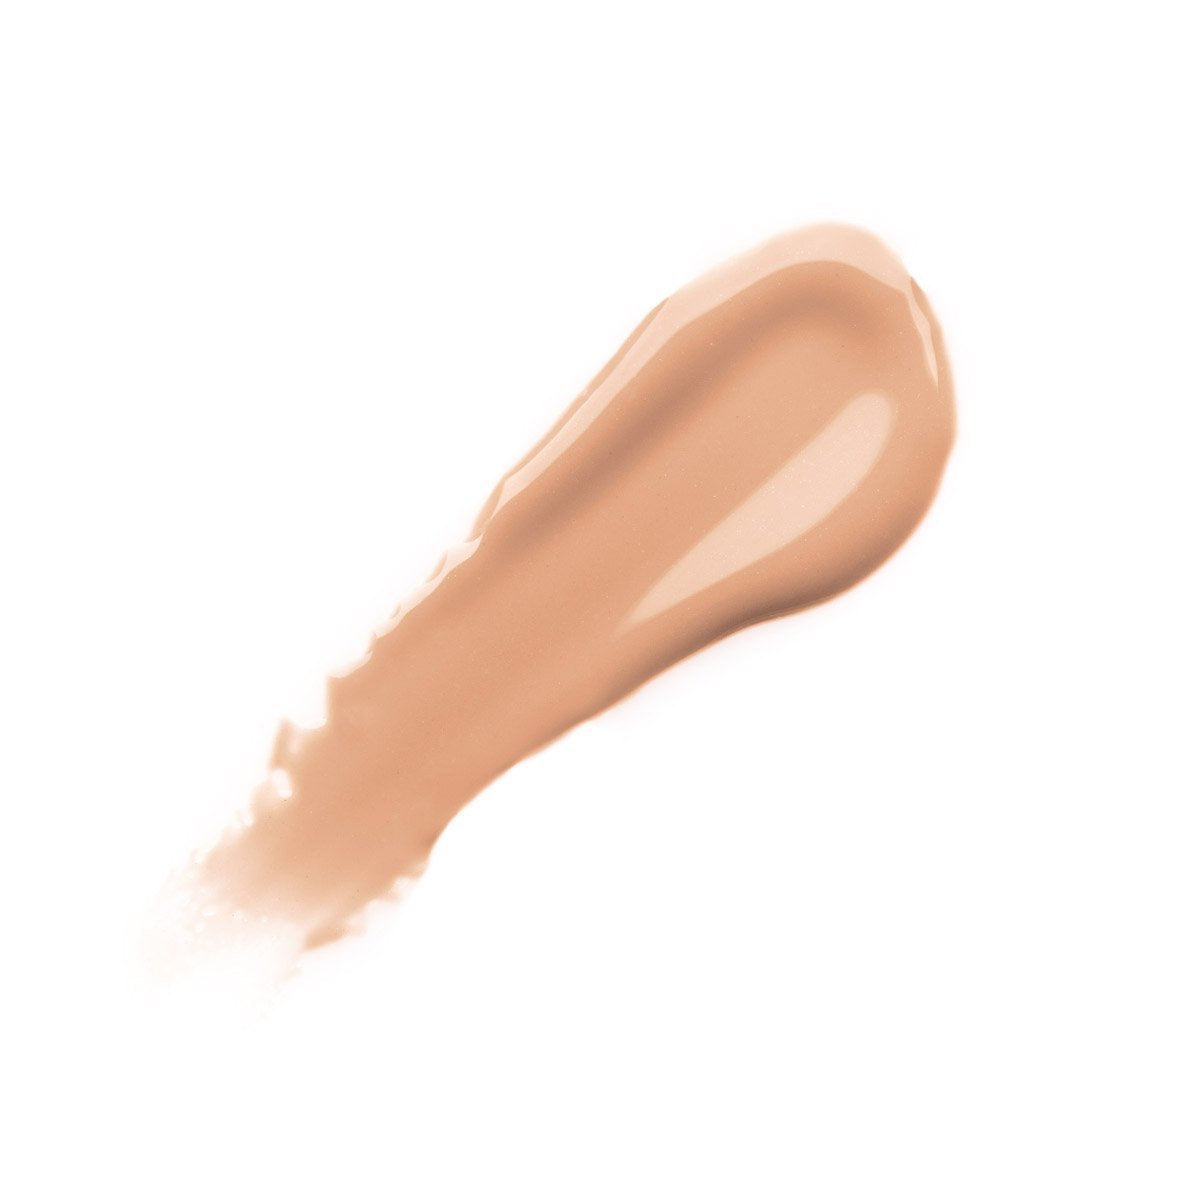 NUDITE - WARM PEACH WITH GOLD SHIMMER - sparkling peach lipgloss